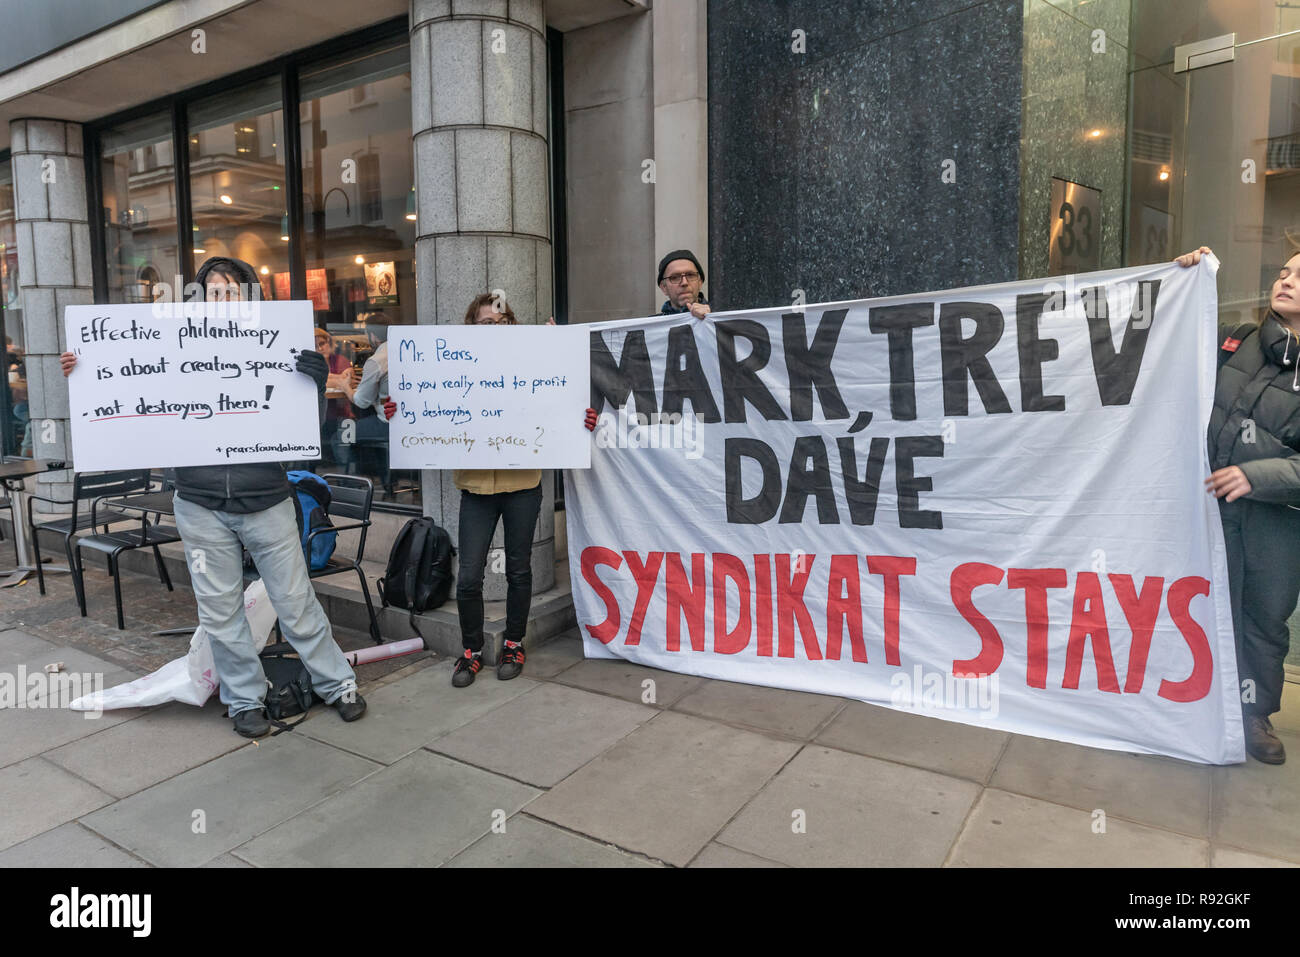 London, UK. 18th December 2018. Berlin community centre and pub Syndikat protested with London Renters Union outside the London offices of their landlord, Global Real Estate Investors Limited, owned by the secretive Pears brothers, Mark, Trev & Dave, three of the richest men in the UK, who through various 'letterbox' companies own around 6200 properties in Berlin, against notice to quit after being open for 33 years in Berlin-Neukölln. Credit: Peter Marshall/Alamy Live News Stock Photo